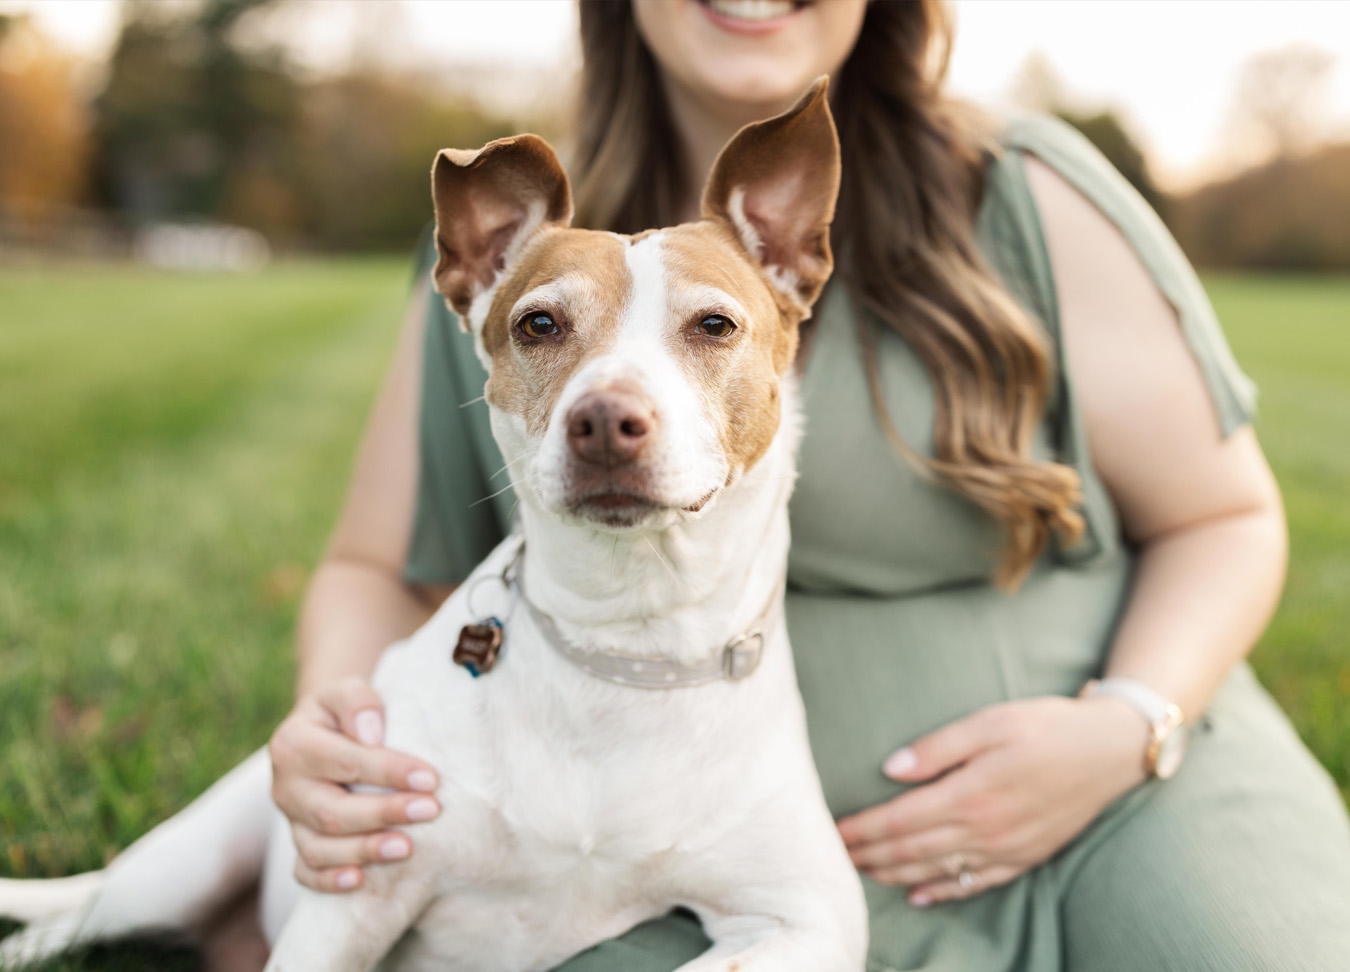 pregnant mom and her dog smile in a picture together